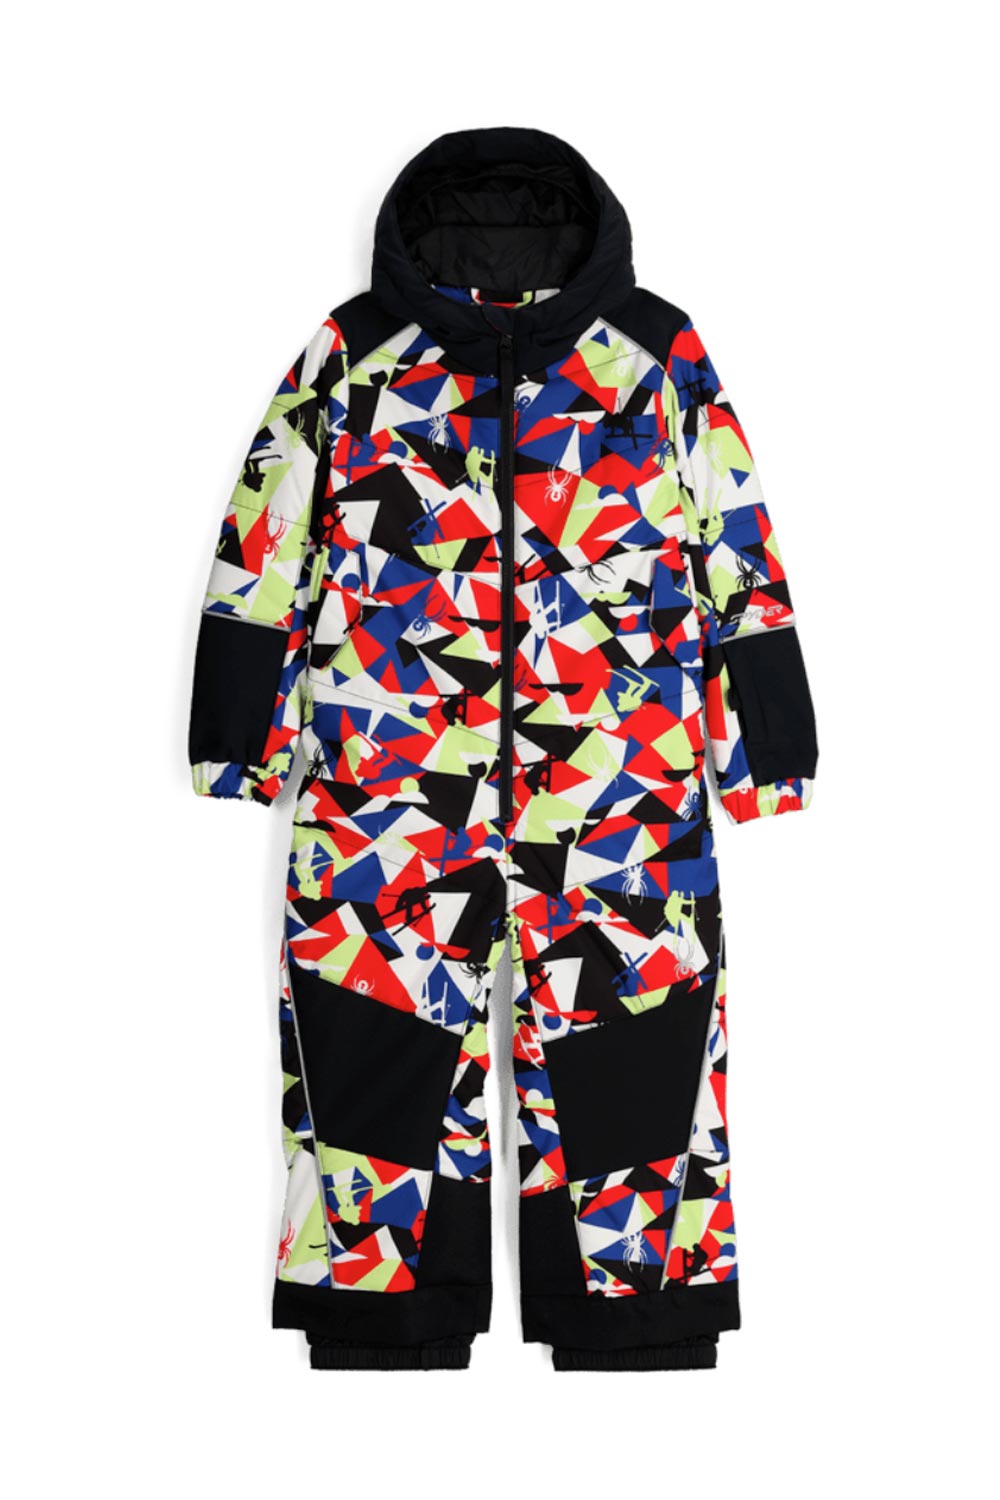 toddler boys' one piece snowsuit, multicolor with black accents.